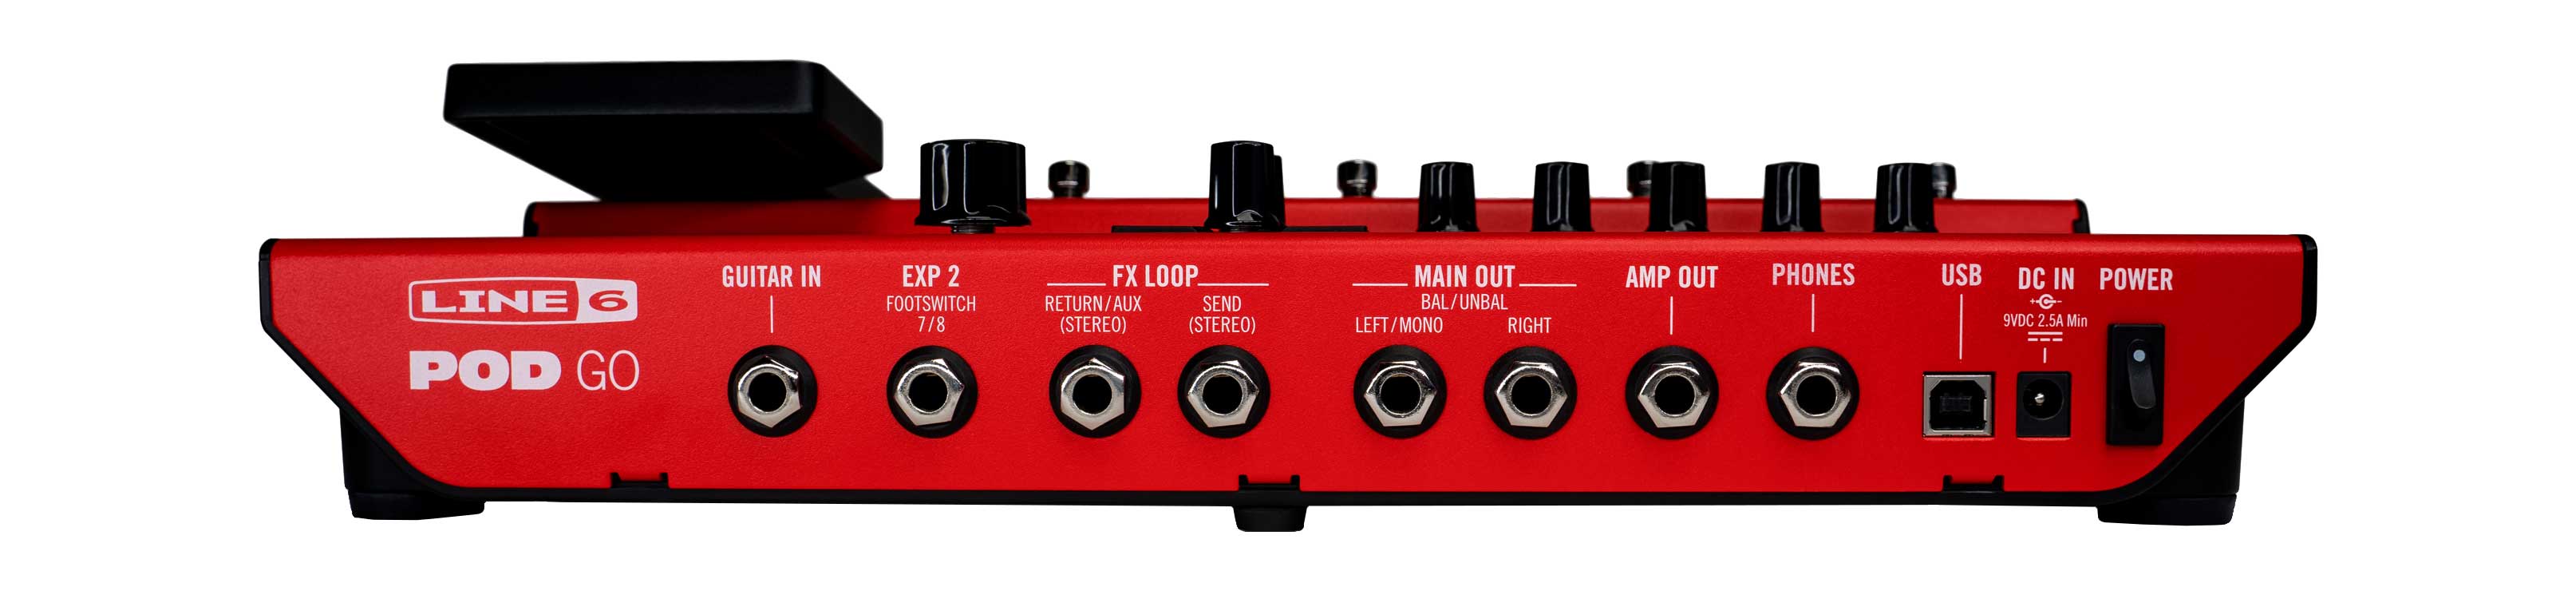 Line 6 POD Go Limited Edition Red Guitar Amp Modeller and Multi